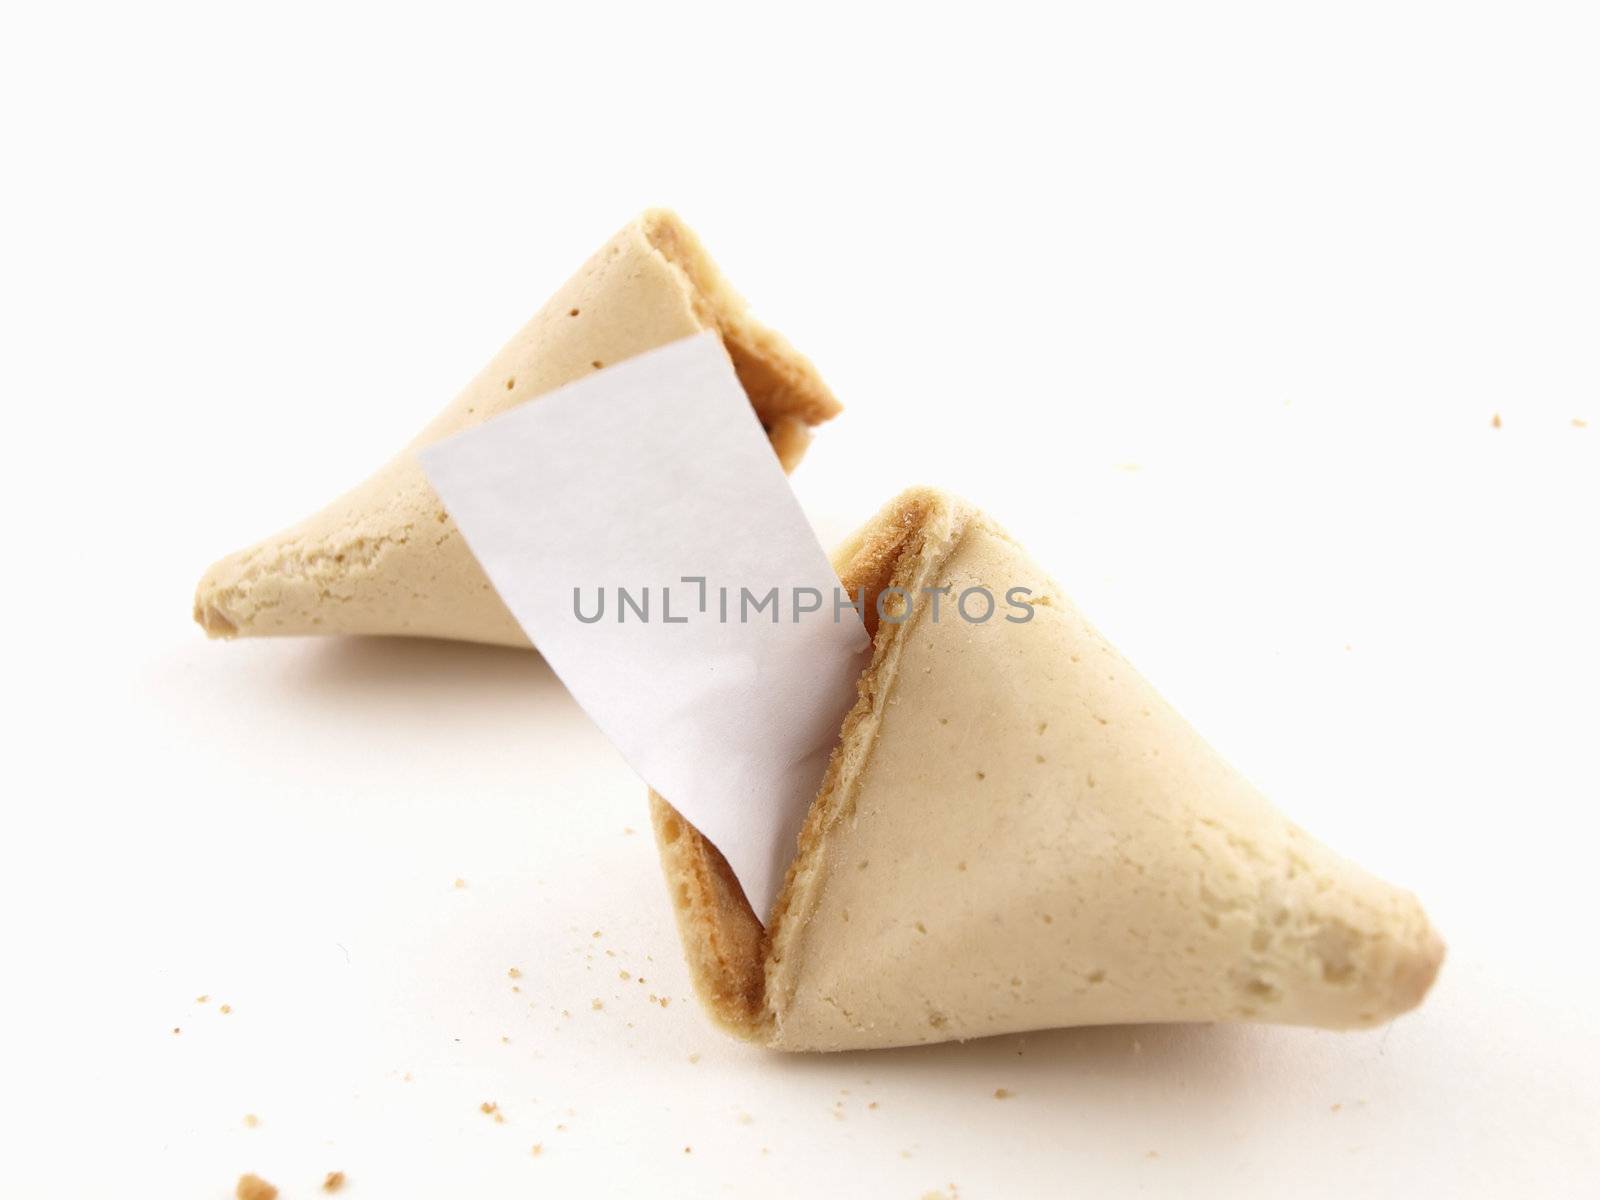 A broken fortune cookie over a white background. Cookie has blank fortune sticking out of one side.